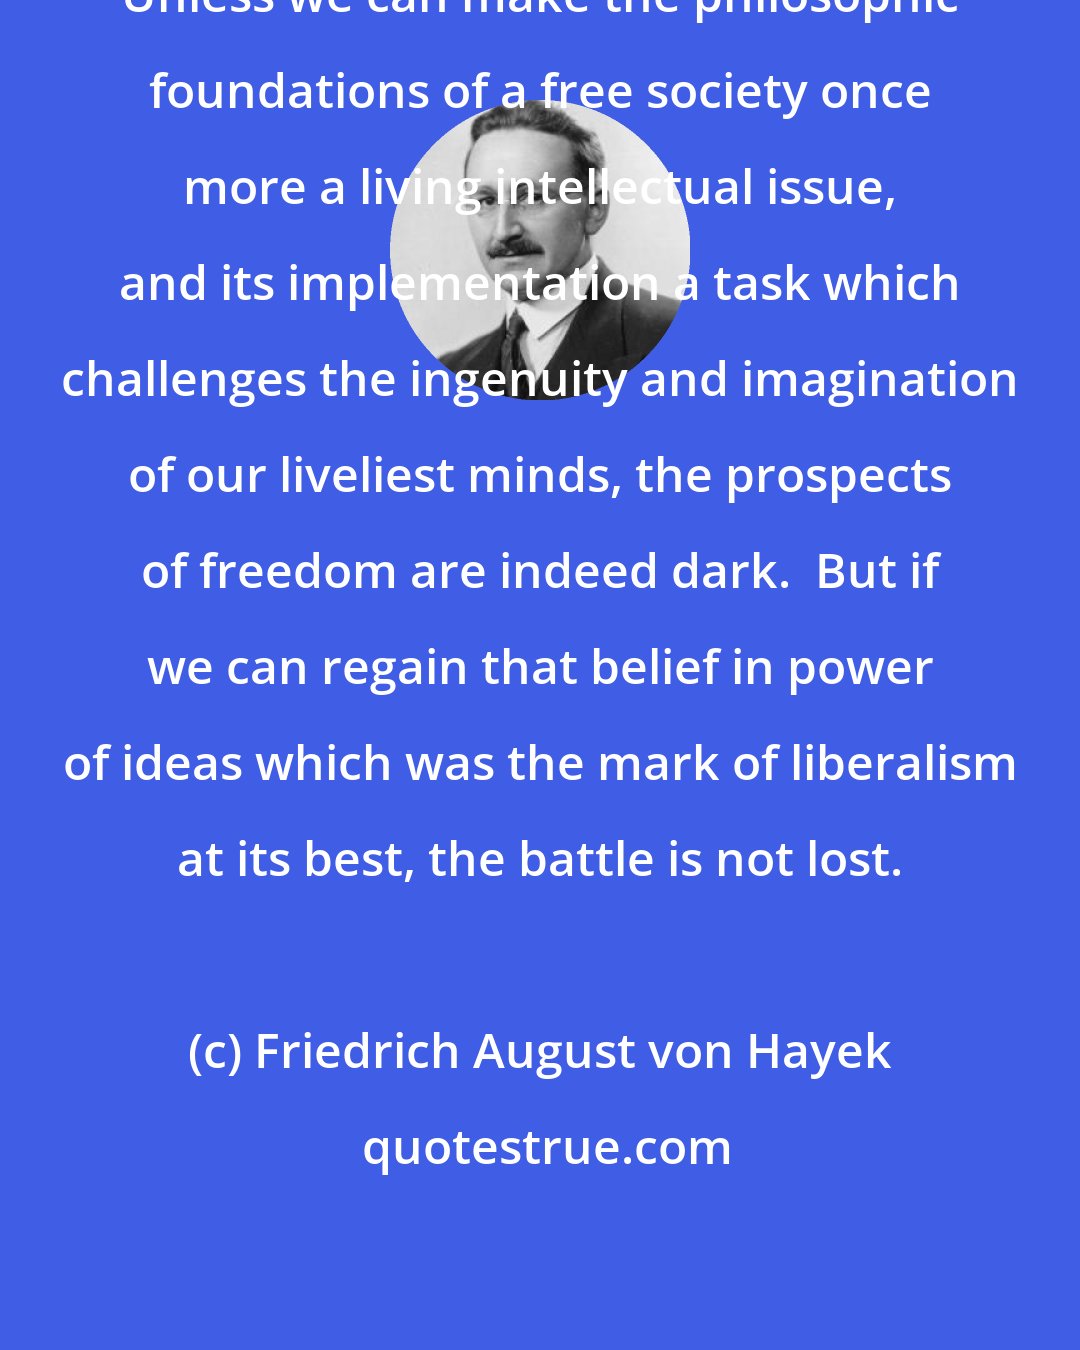 Friedrich August von Hayek: Unless we can make the philosophic foundations of a free society once more a living intellectual issue, and its implementation a task which challenges the ingenuity and imagination of our liveliest minds, the prospects of freedom are indeed dark.  But if we can regain that belief in power of ideas which was the mark of liberalism at its best, the battle is not lost.